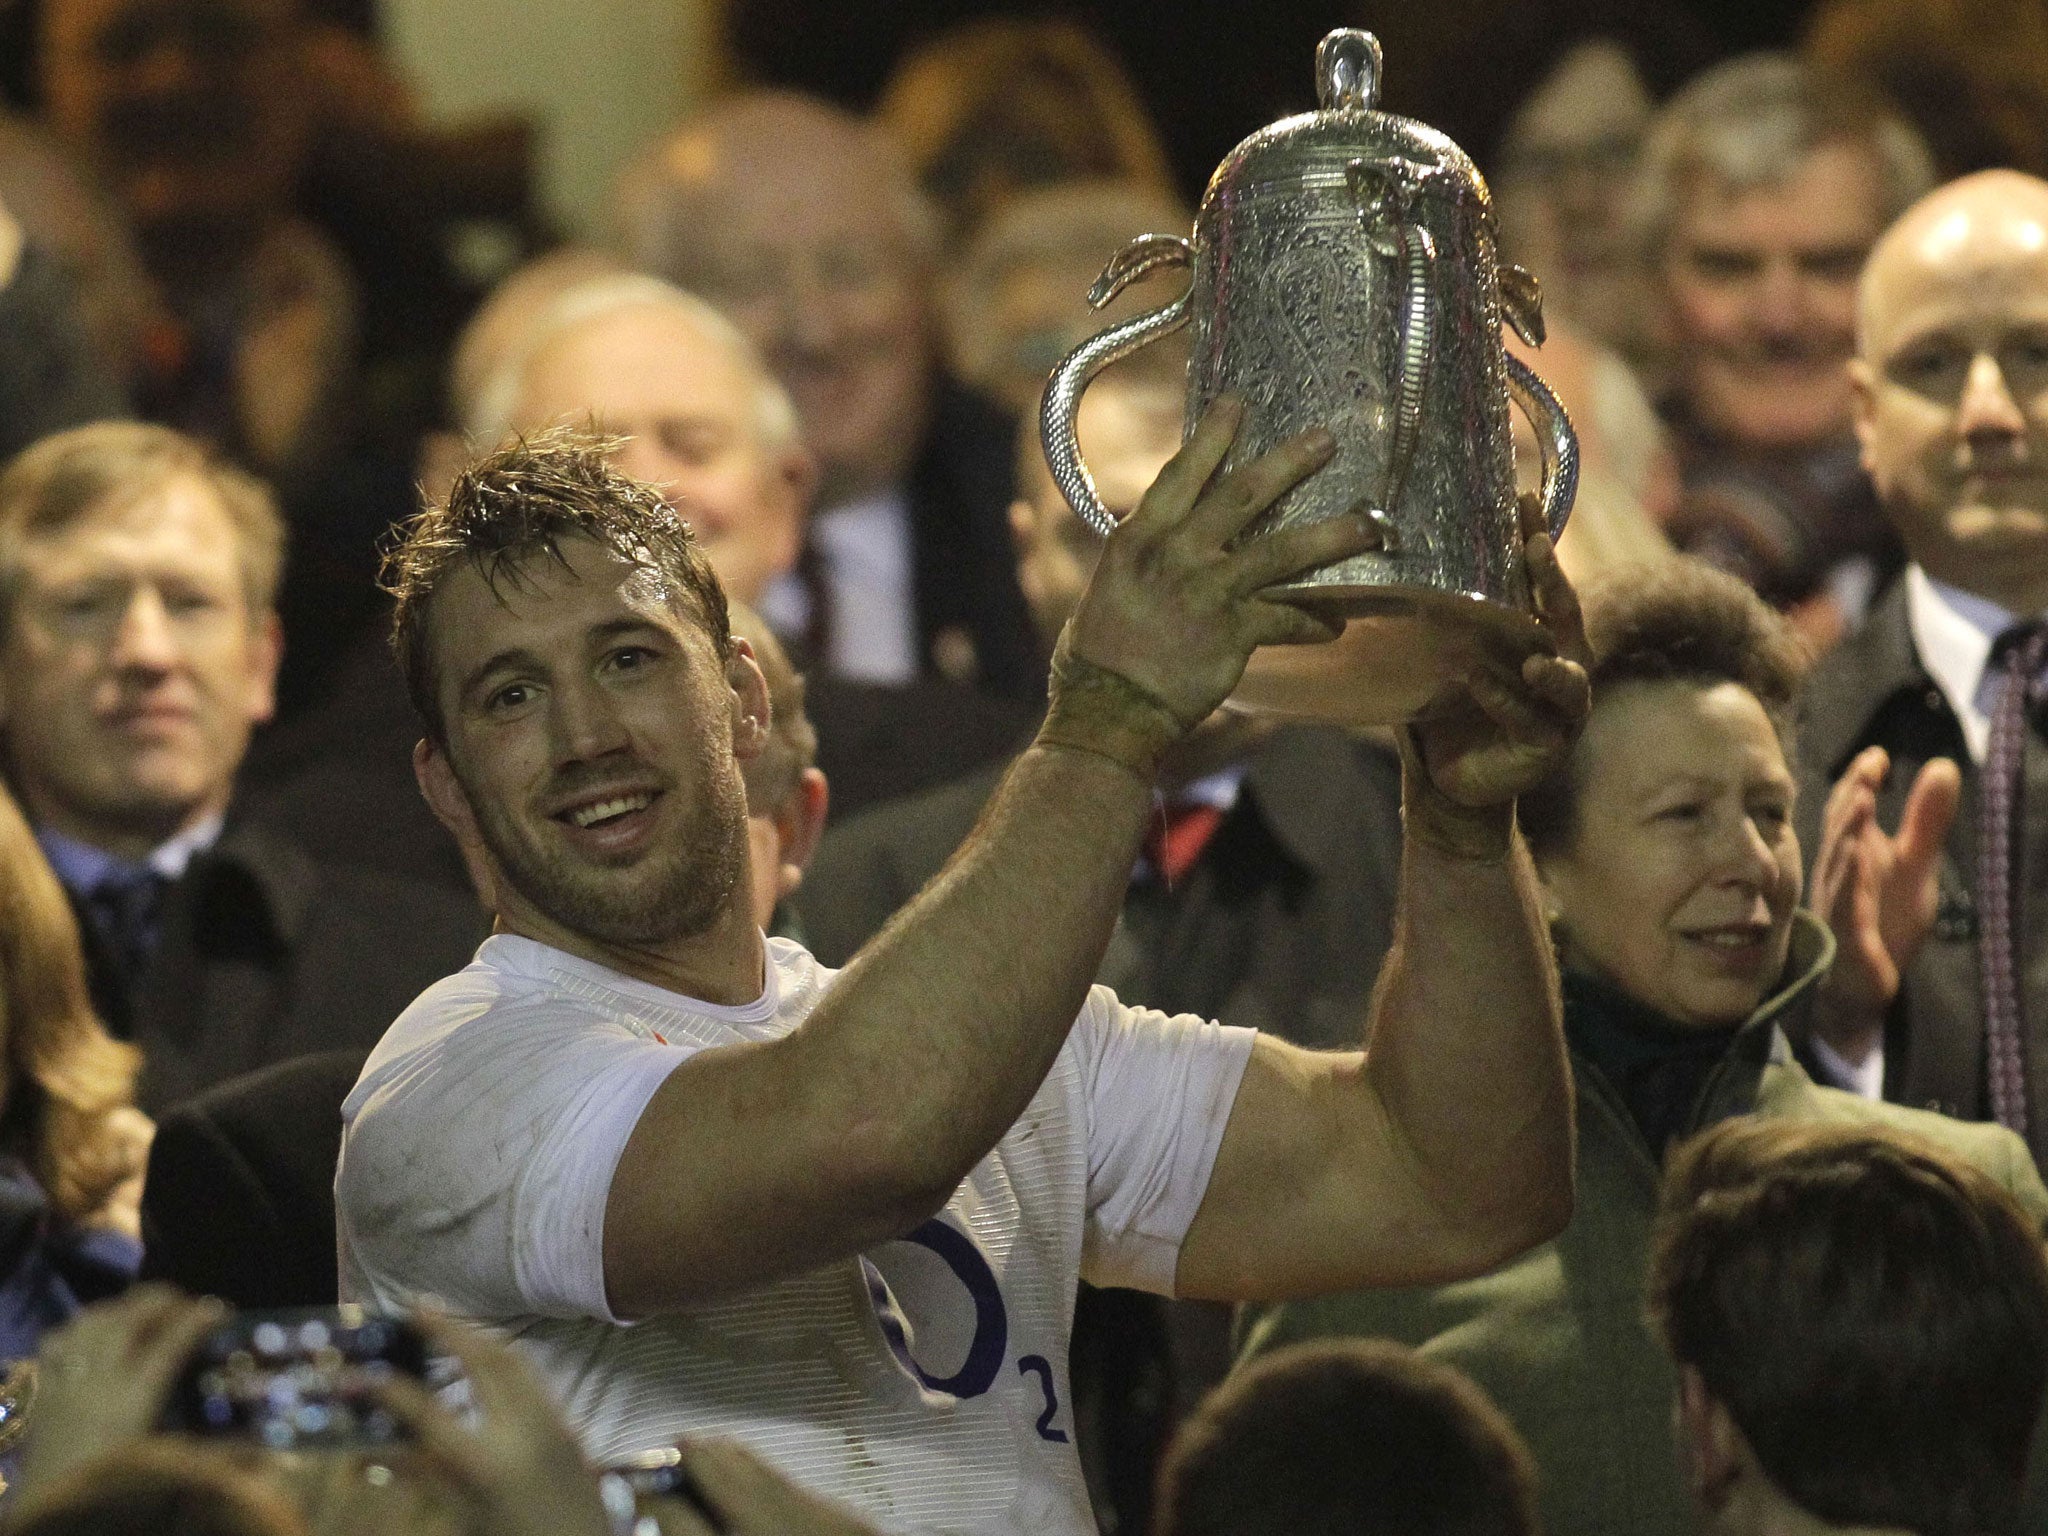 Cup of joy: The England captain Chris Robshaw raises the Calcutta Cup in front of Scottish Rugby patron Princess Anne after England’s impressive 38-18 win over the Scots at Twickenham